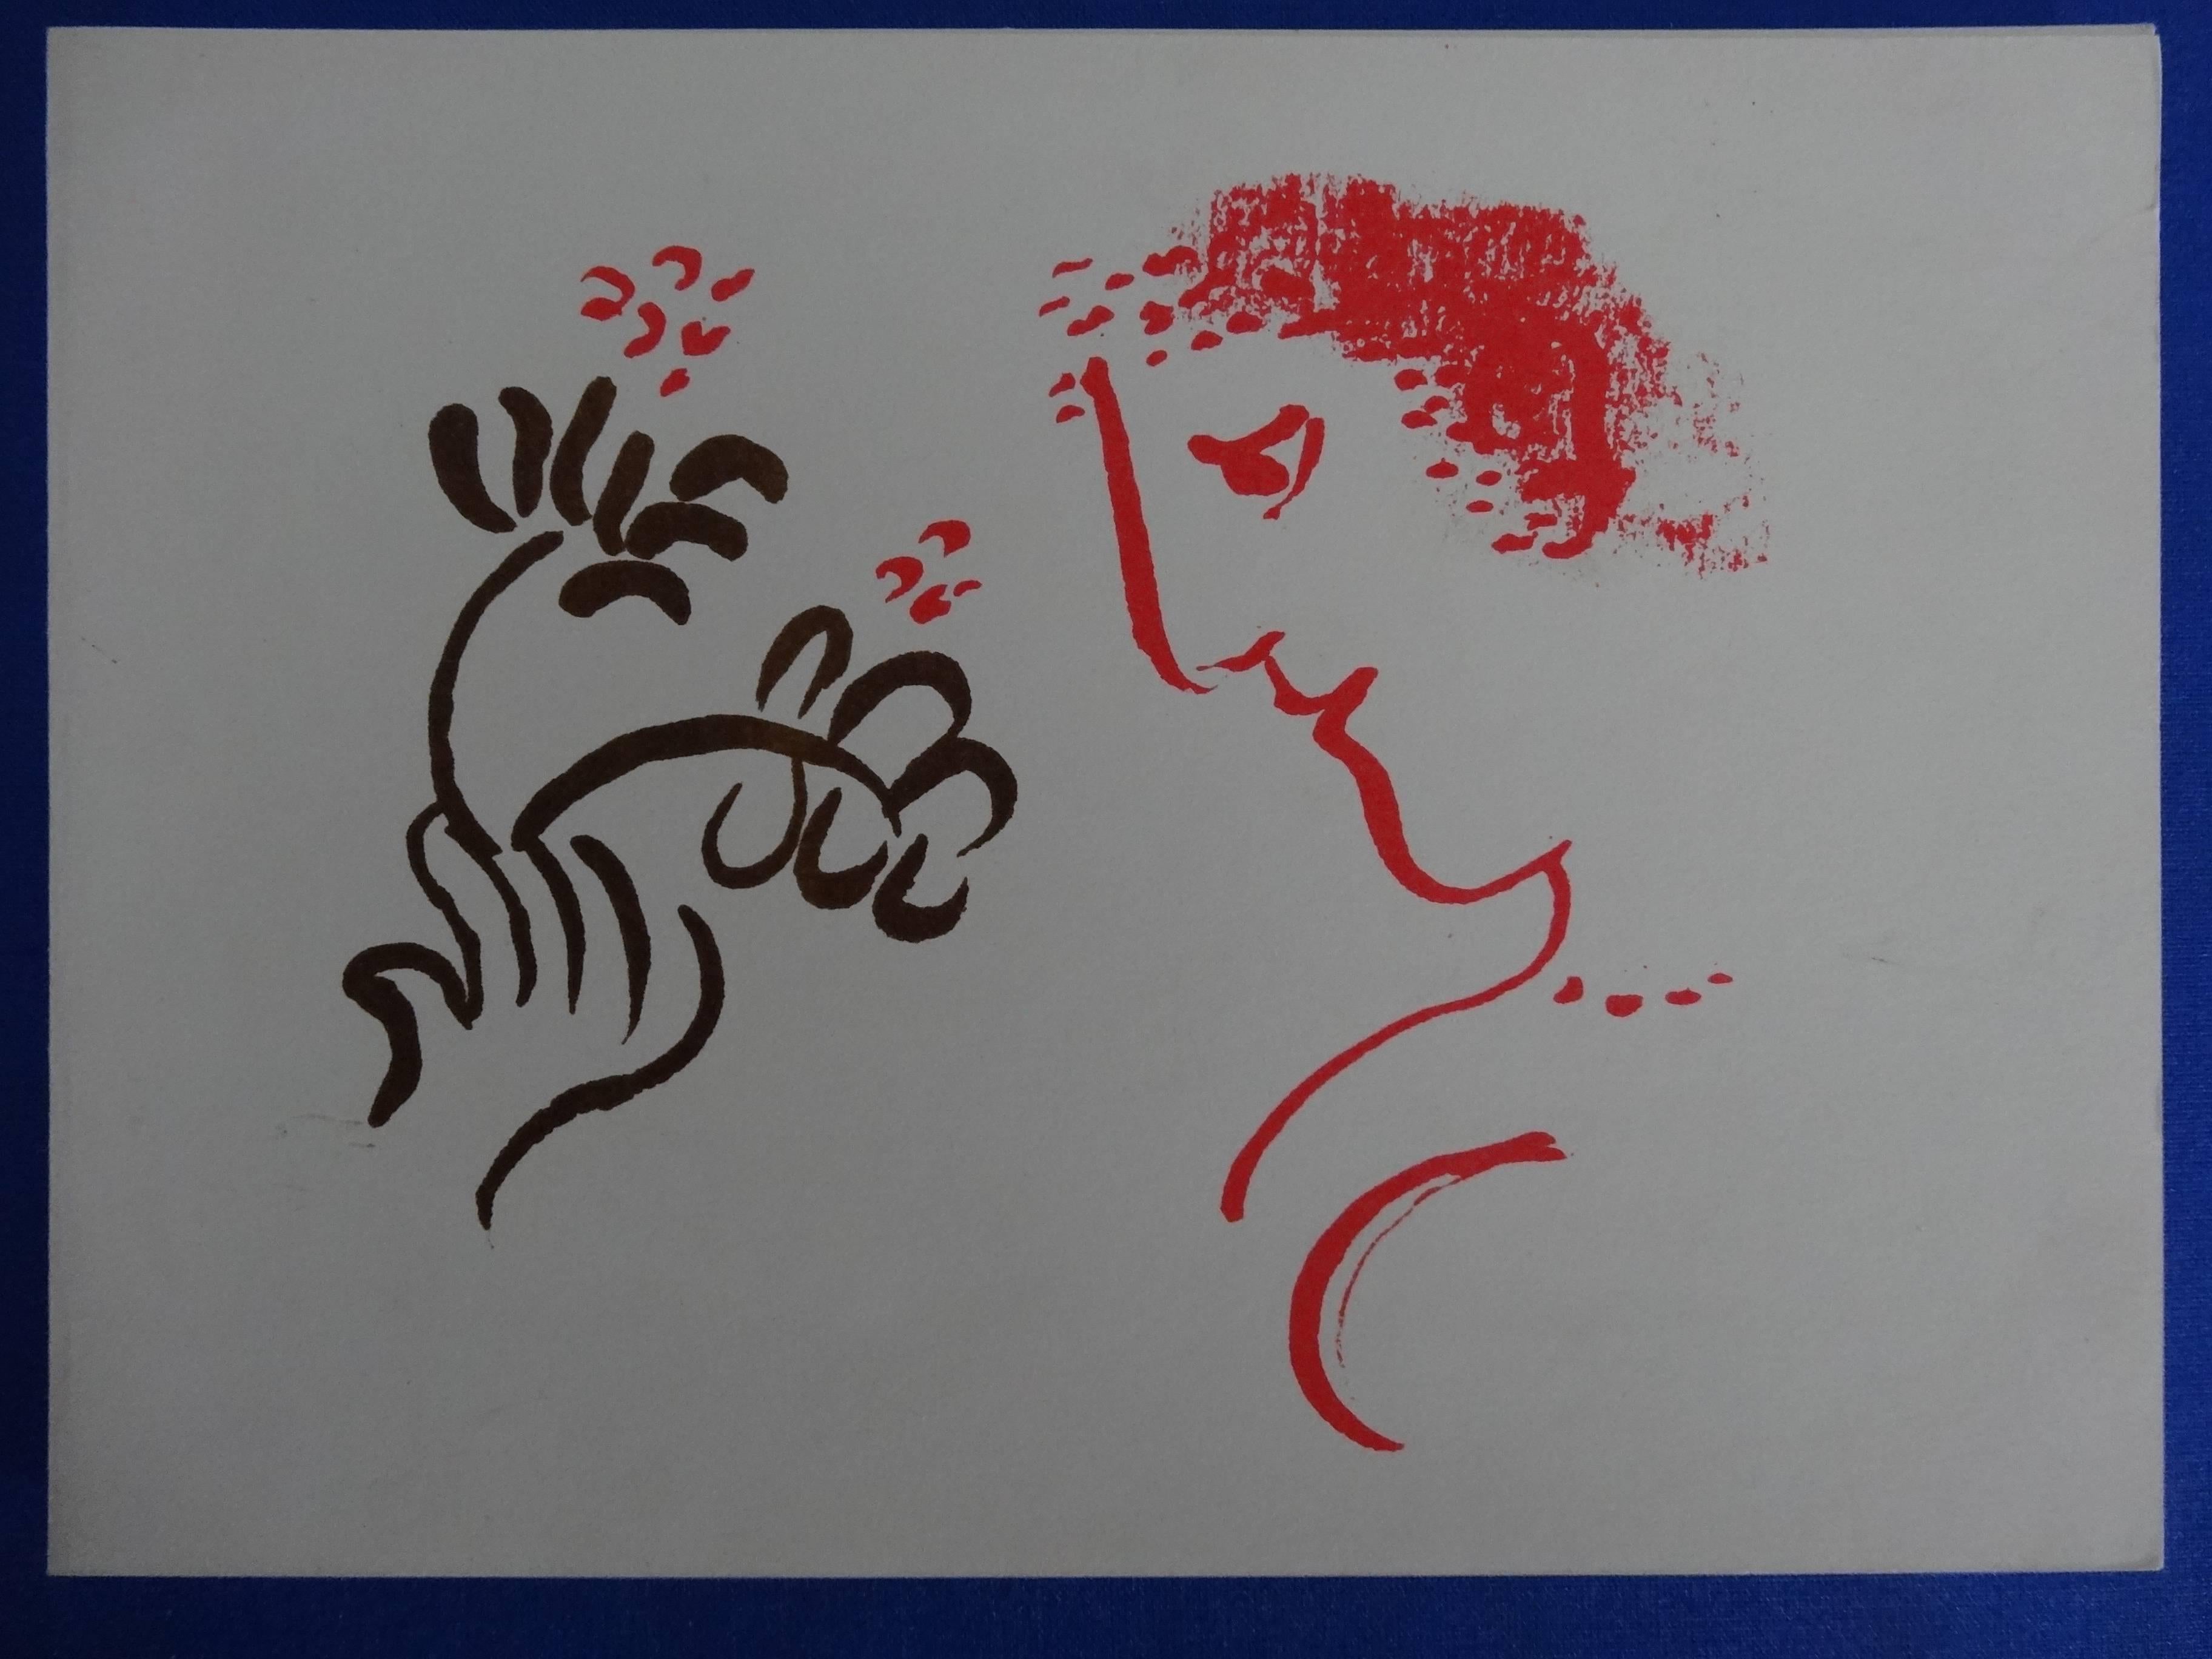 Man With Flowers - Original Lithograph - Maeght 1972 - Print by Marc Chagall